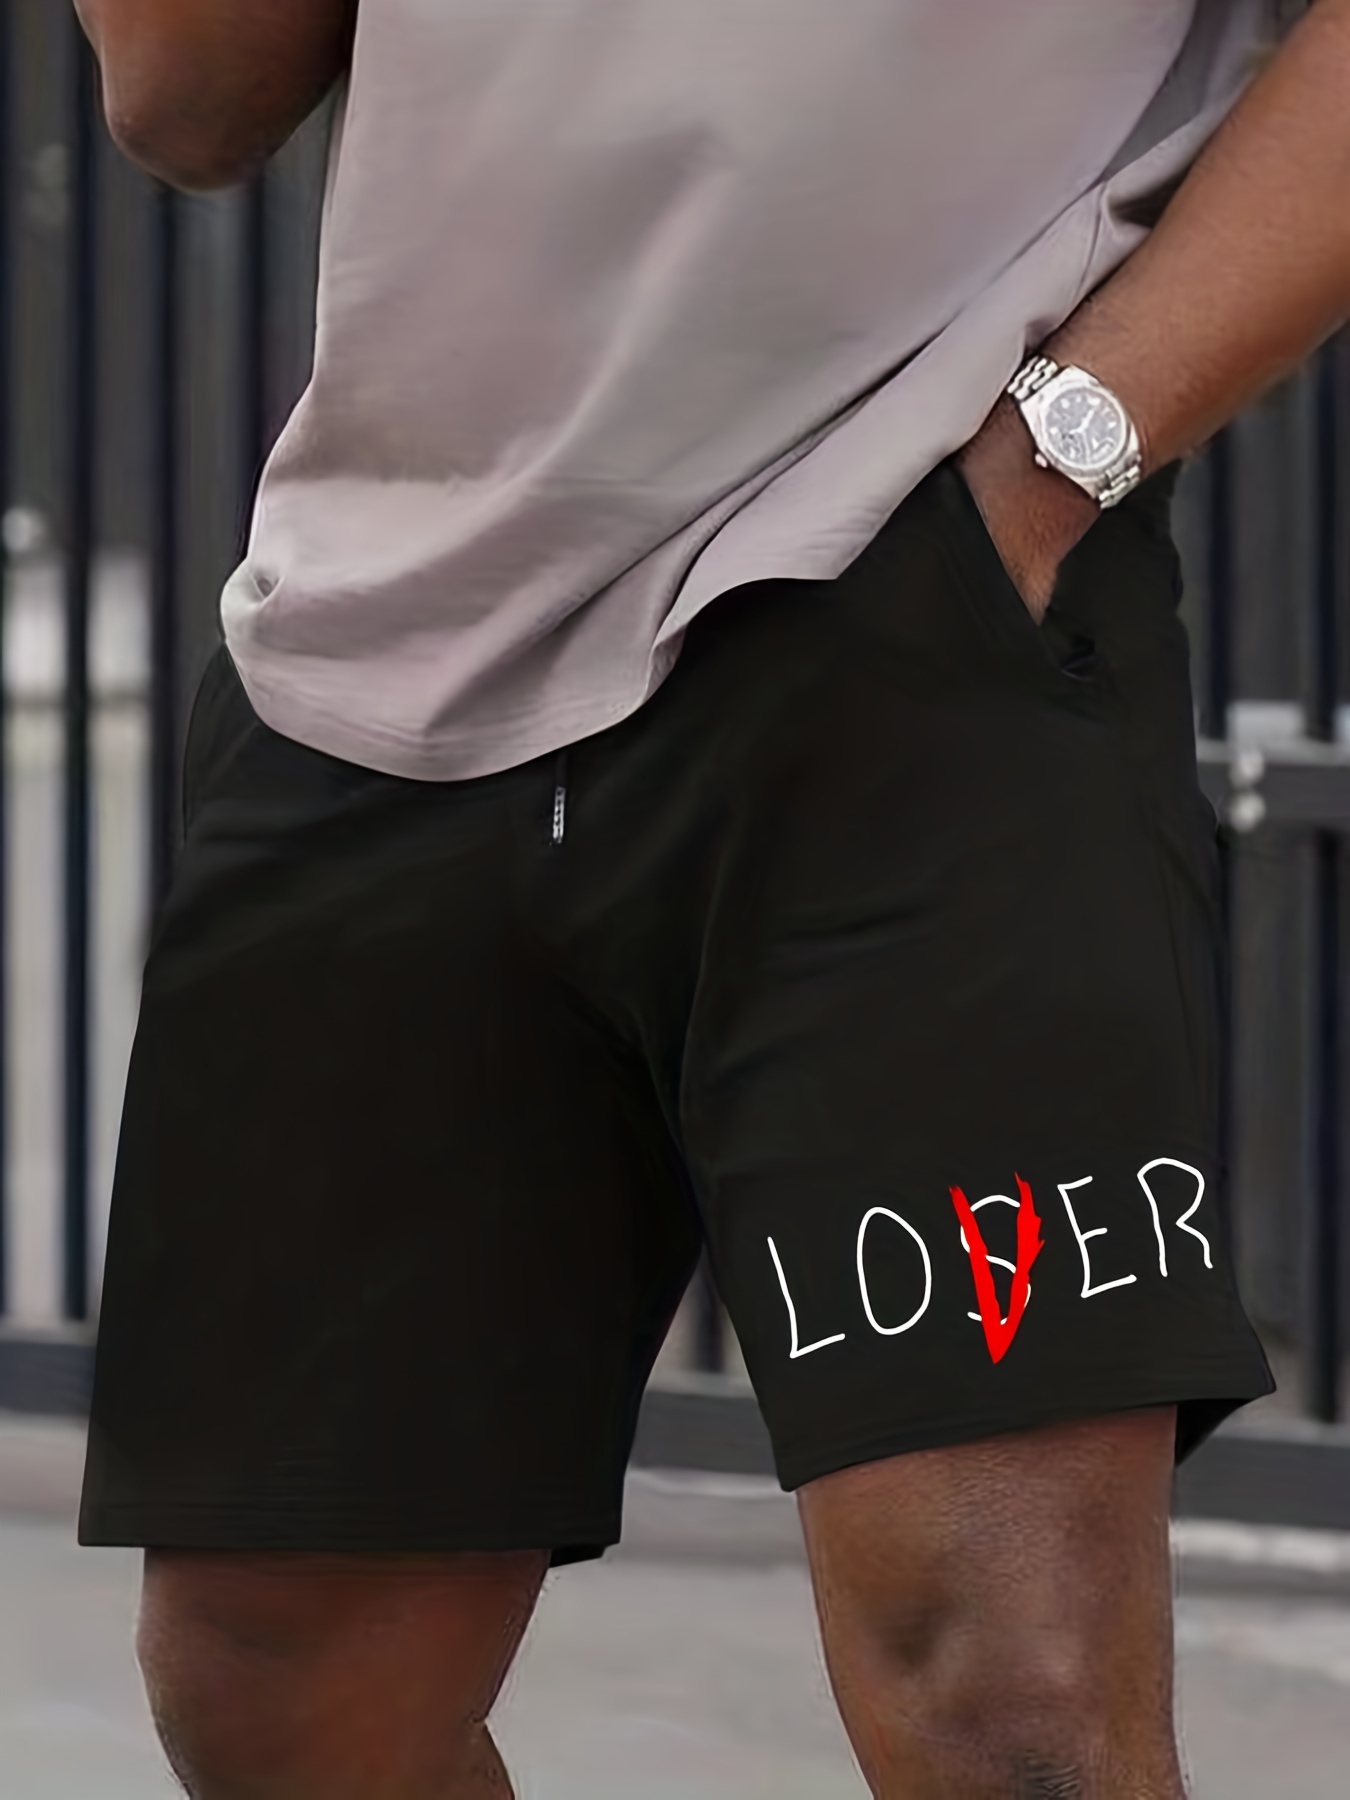 Men's Loungewear Pajama Shorts With Pockets, Elastic Waist Drawstring  Design, LOSER LOVER Print Best Selling Black Shorts For Indoor And Outdoor  Wear